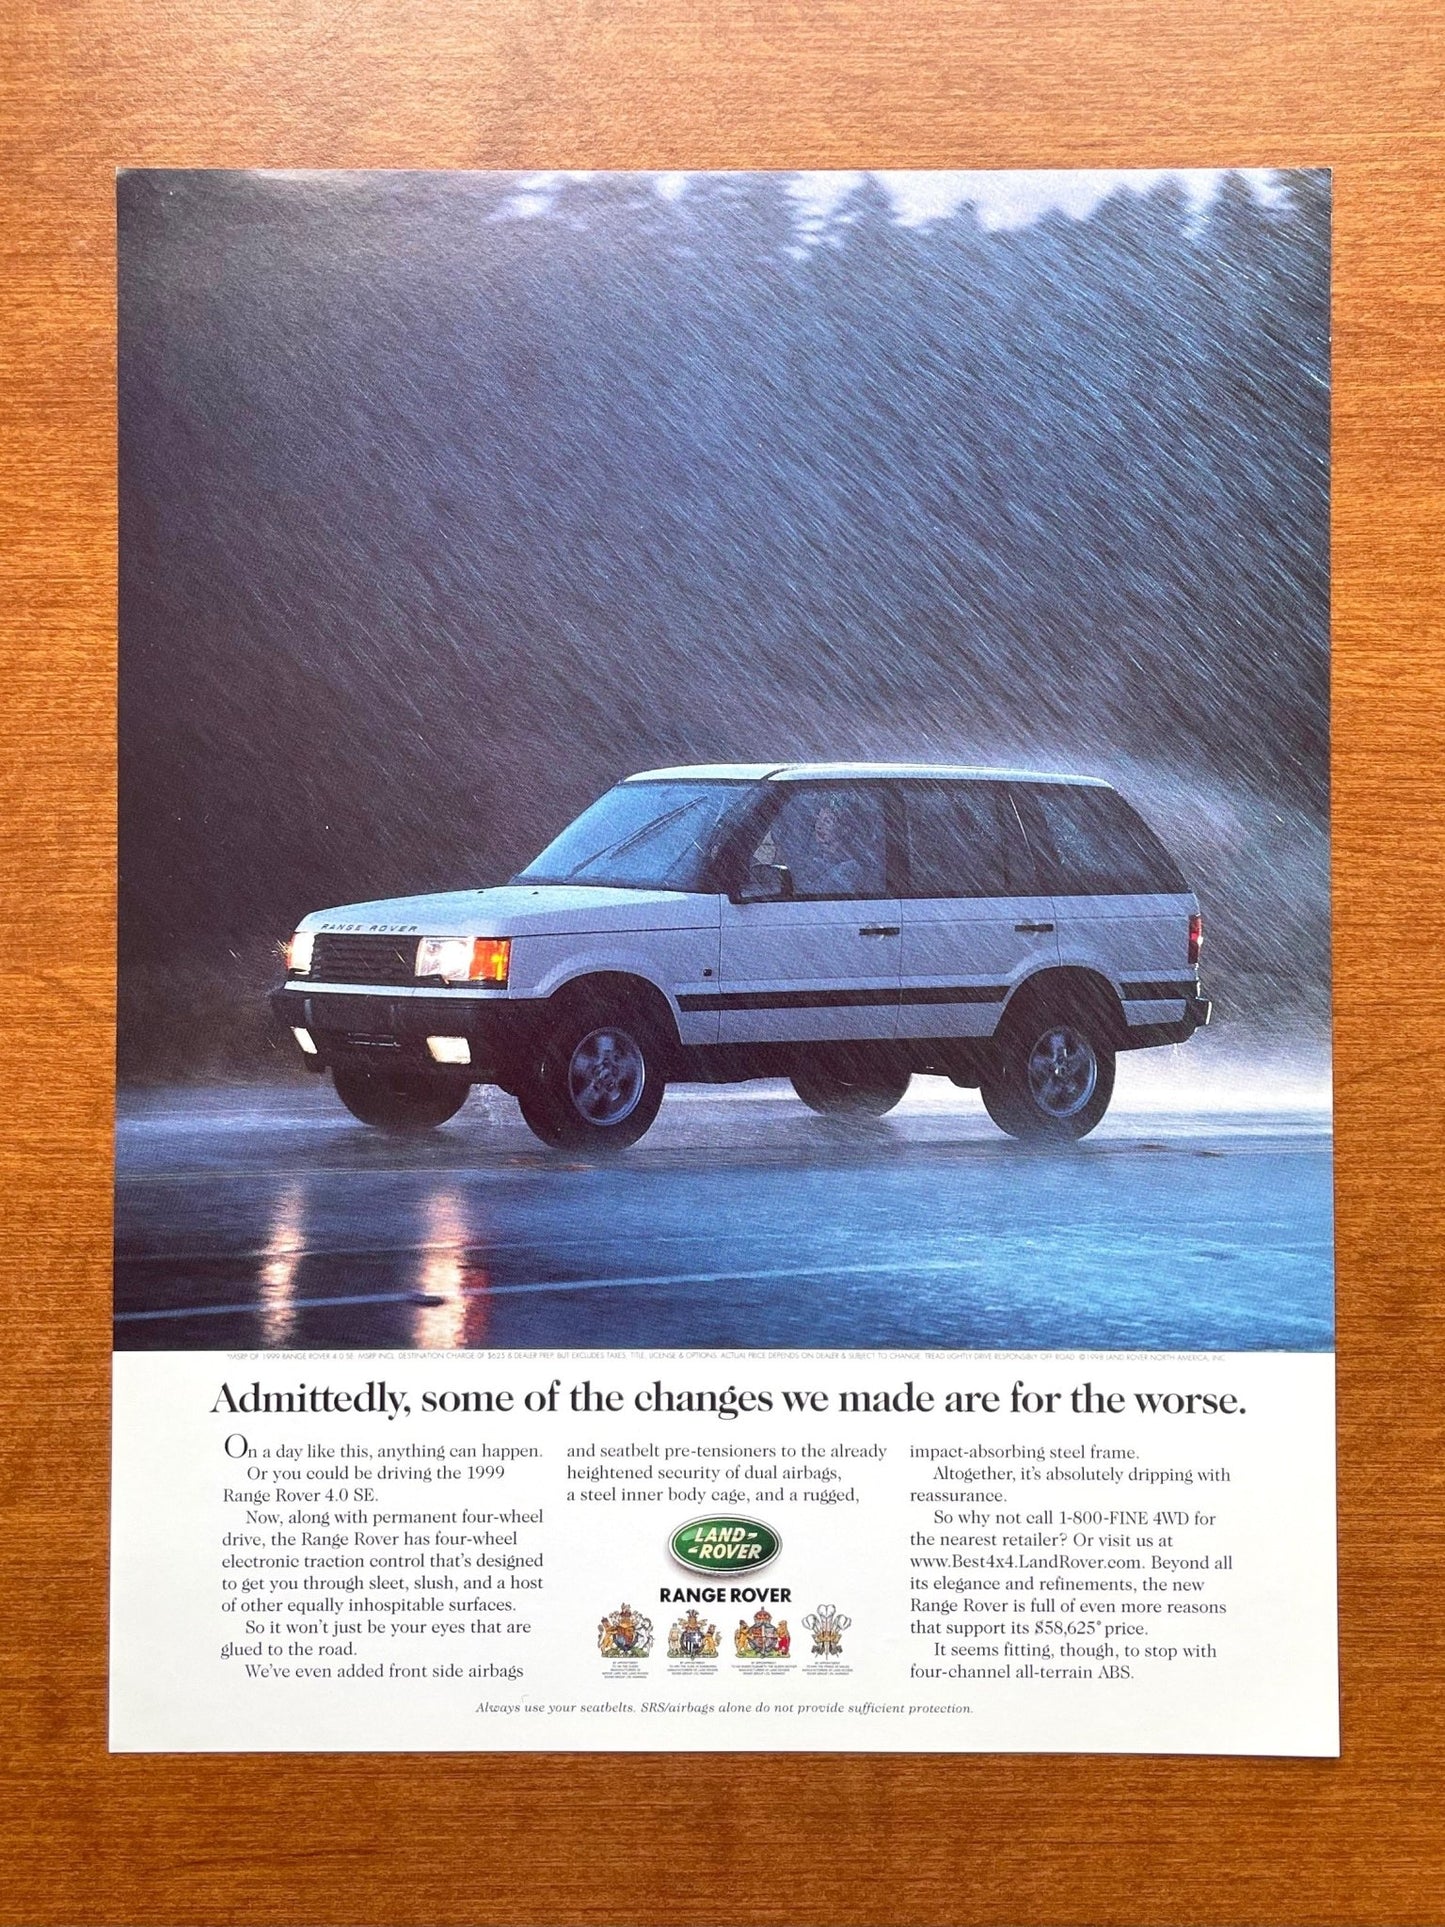 Range Rover "changes we made are for the worse." Ad Proof